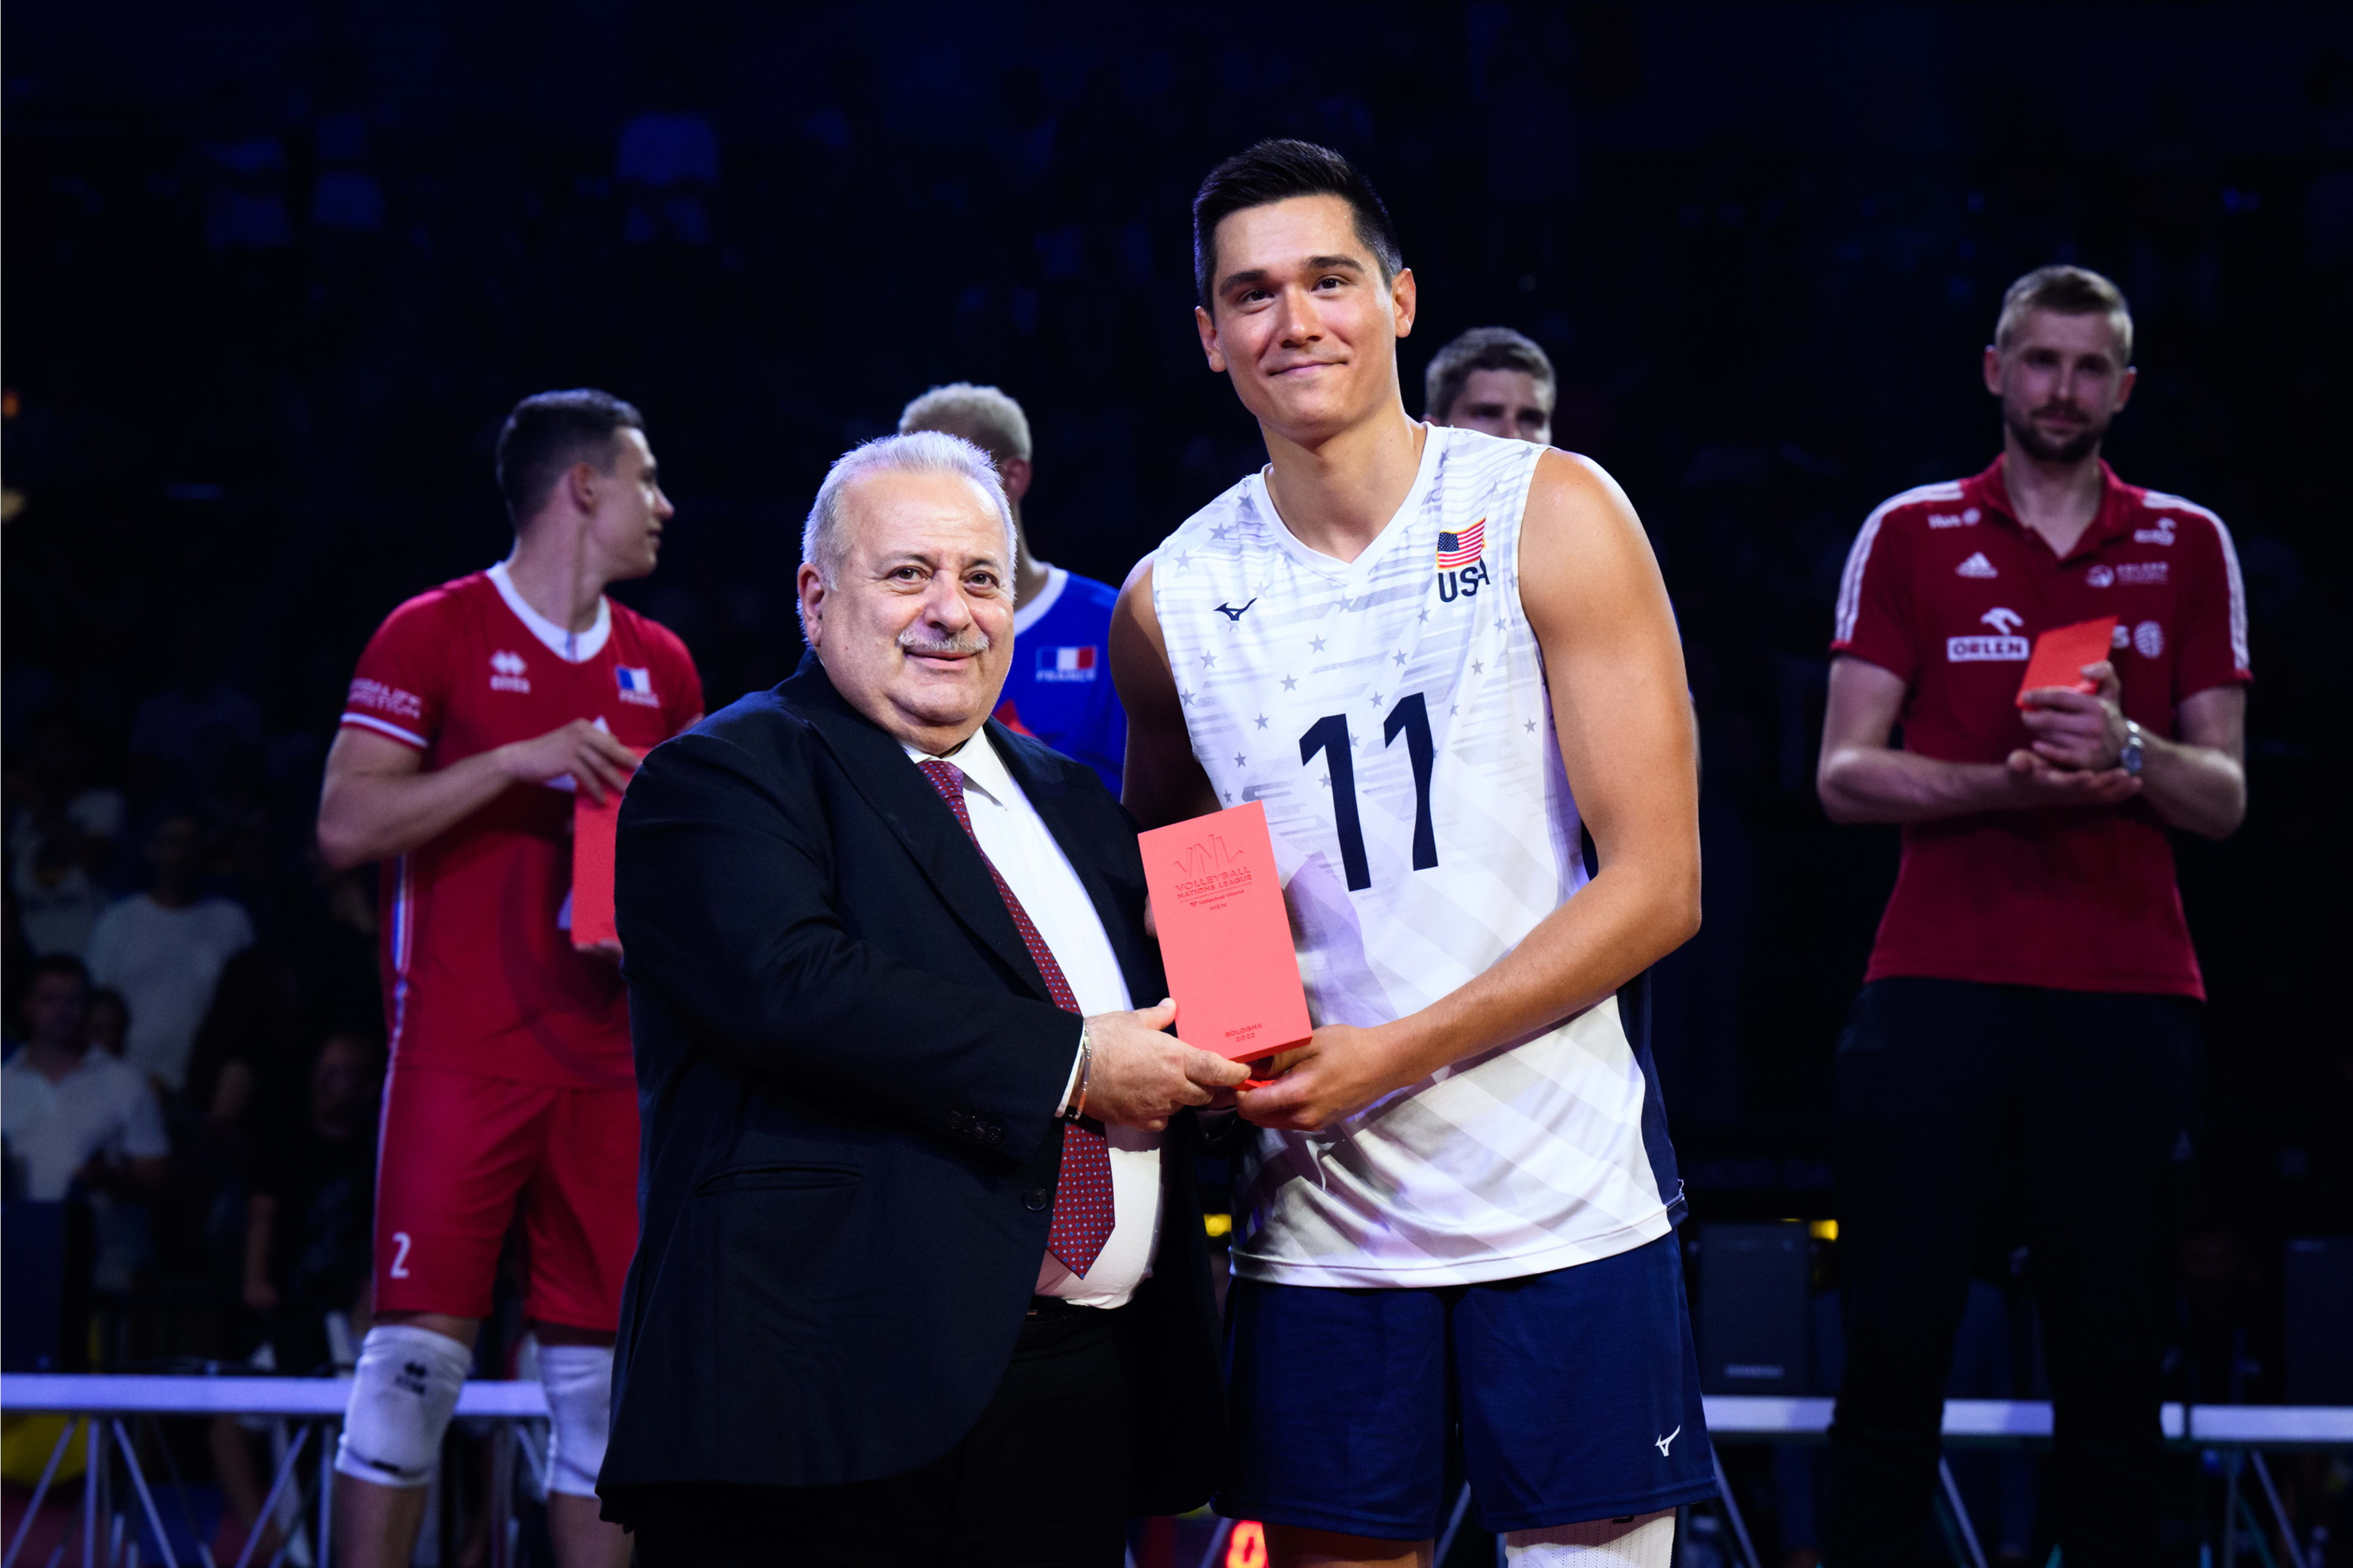 Volleyball Nations League 2022 volleyballworld